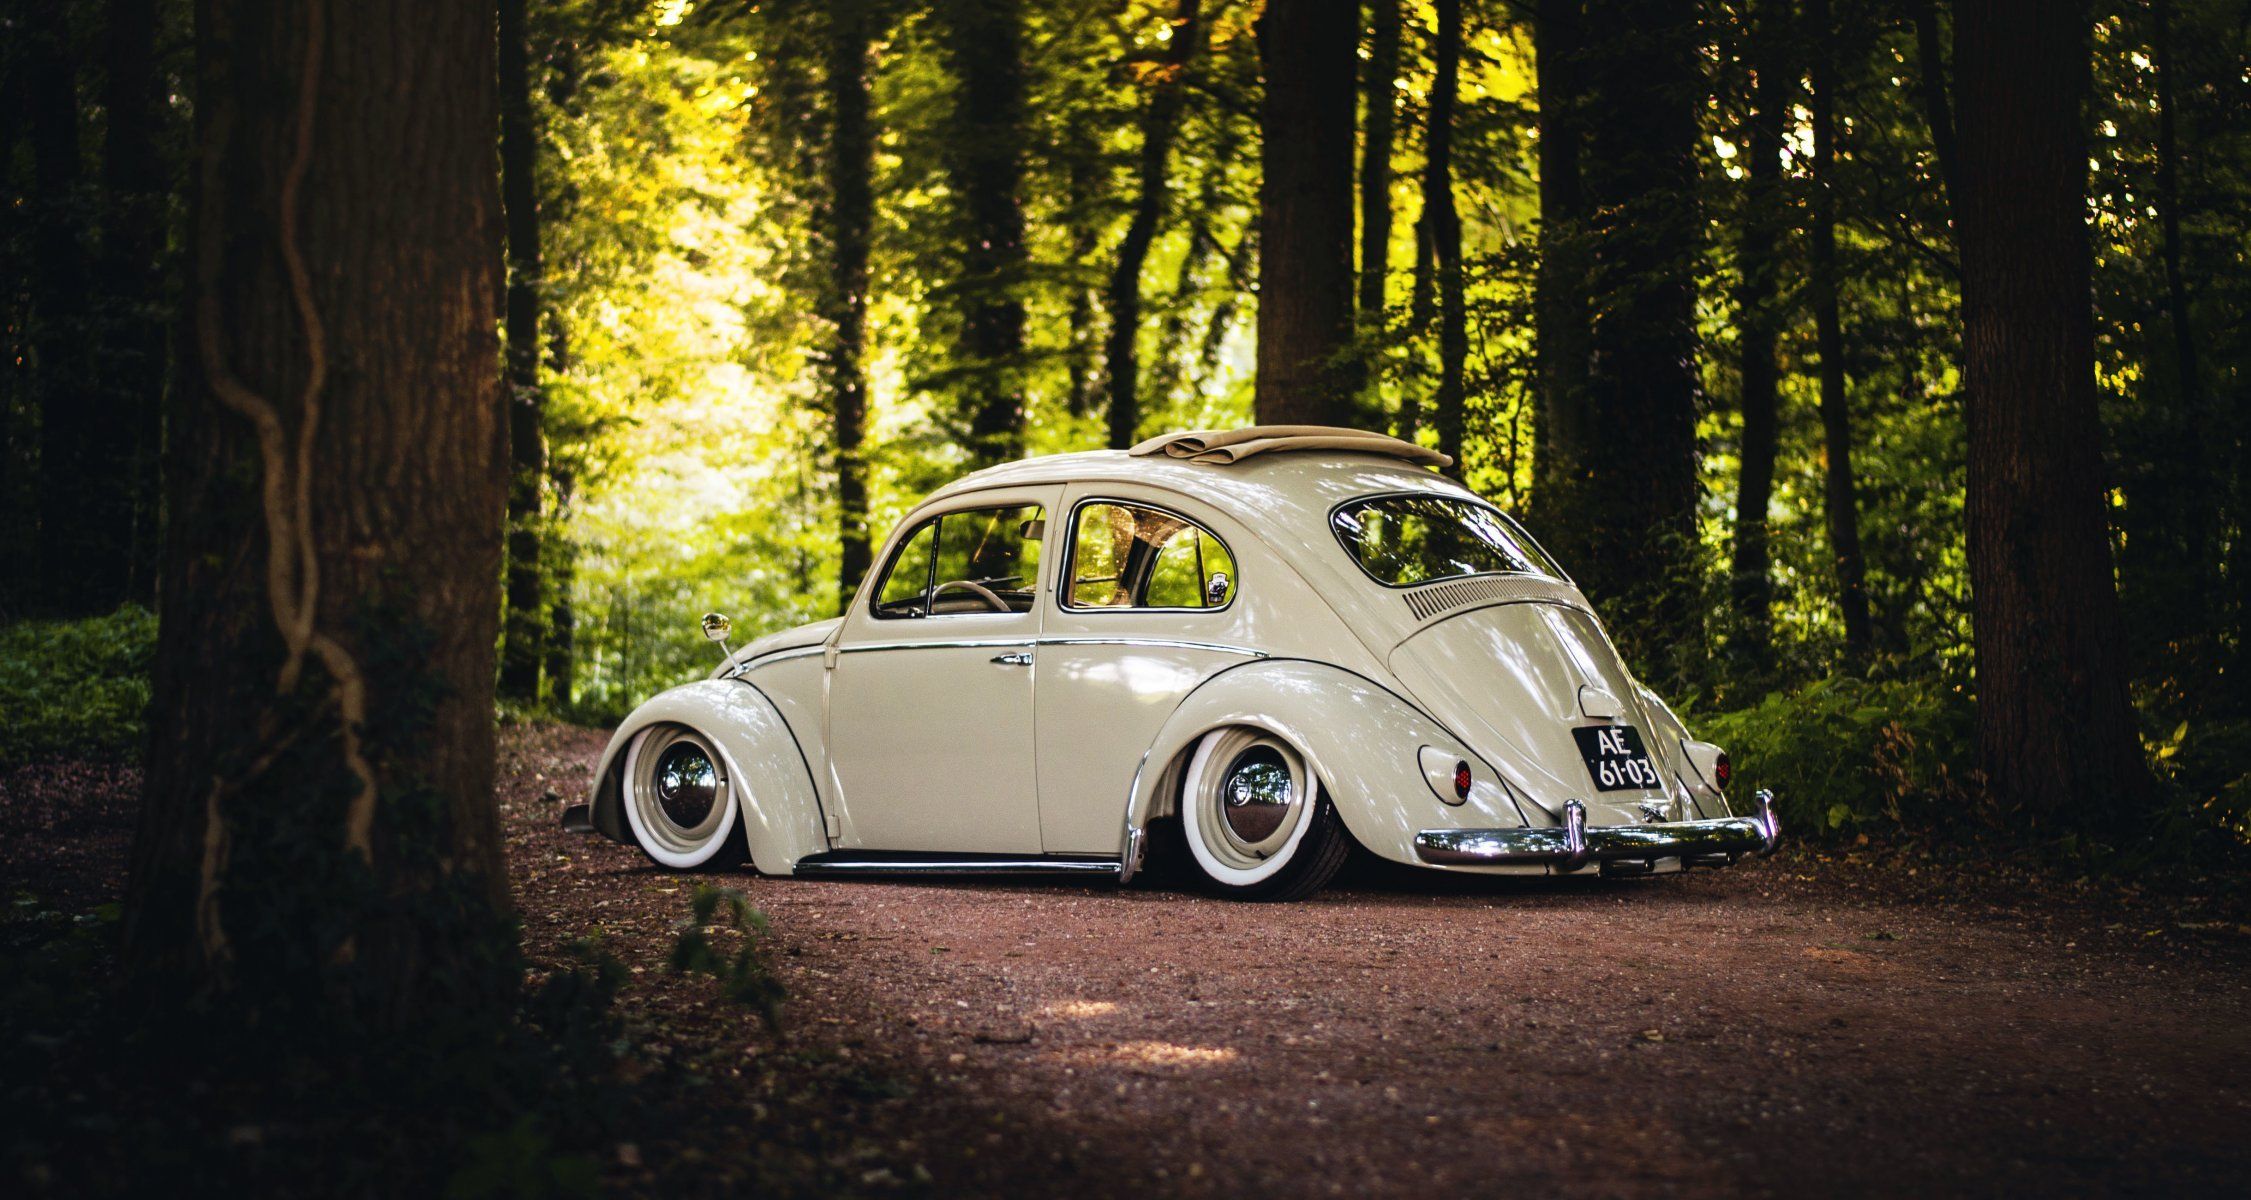 VW Wallpaper. VW Background, VW Wallpaper Retina Display and Background VW Cars